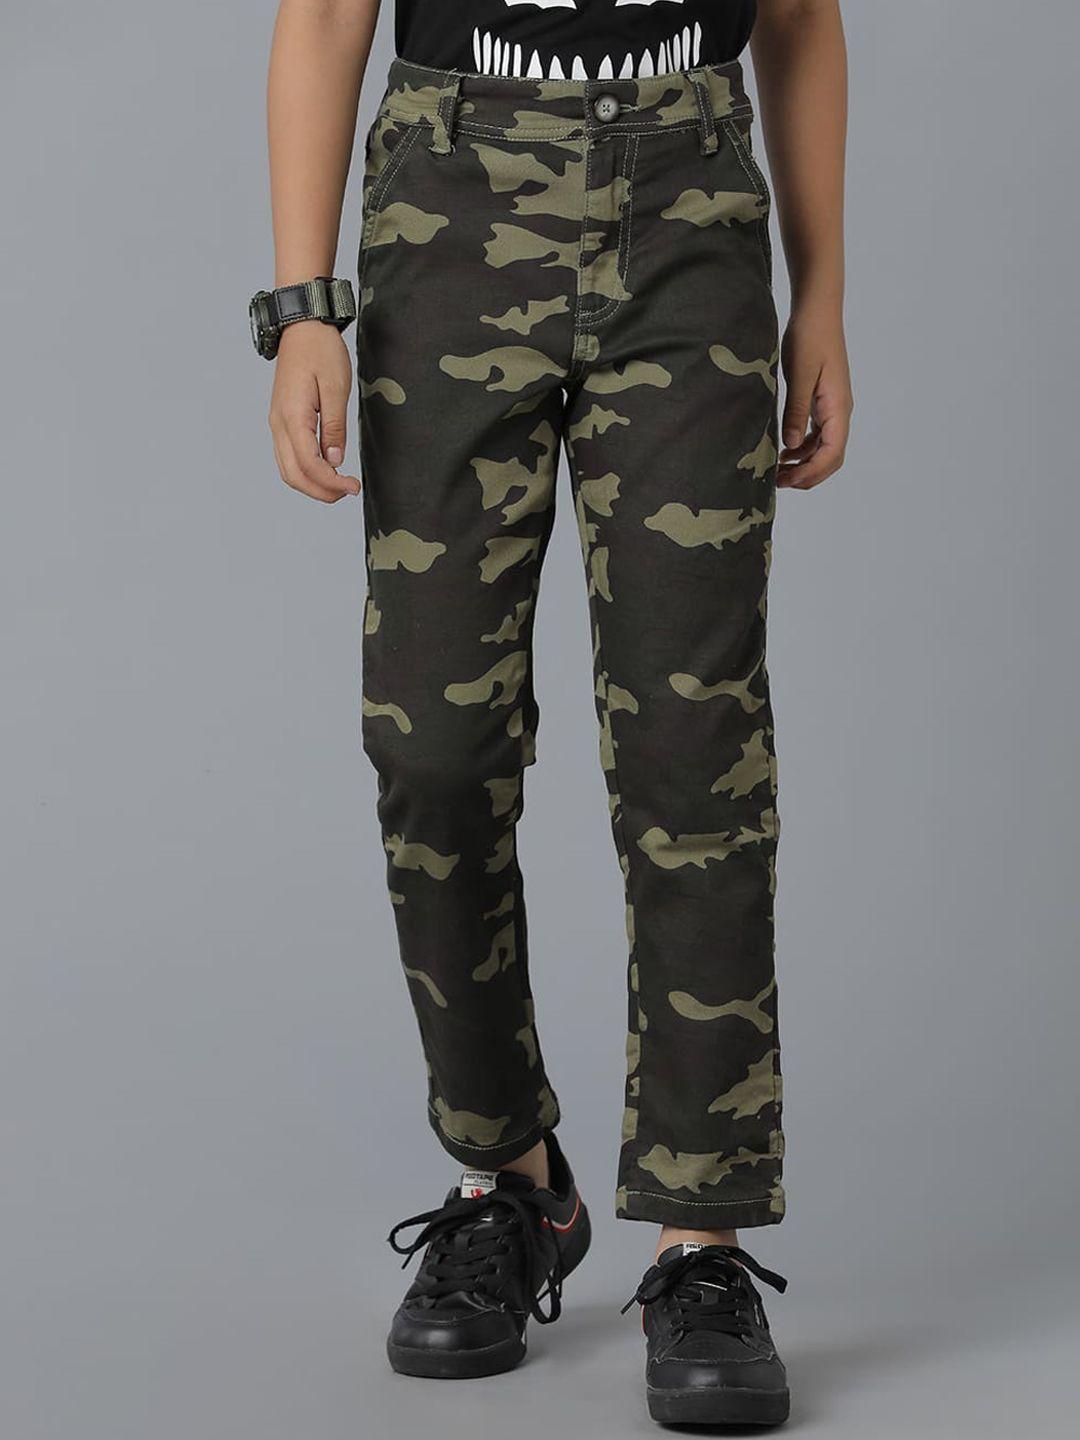 under-fourteen-only-boys-camouflage-printed-cotton-trousers